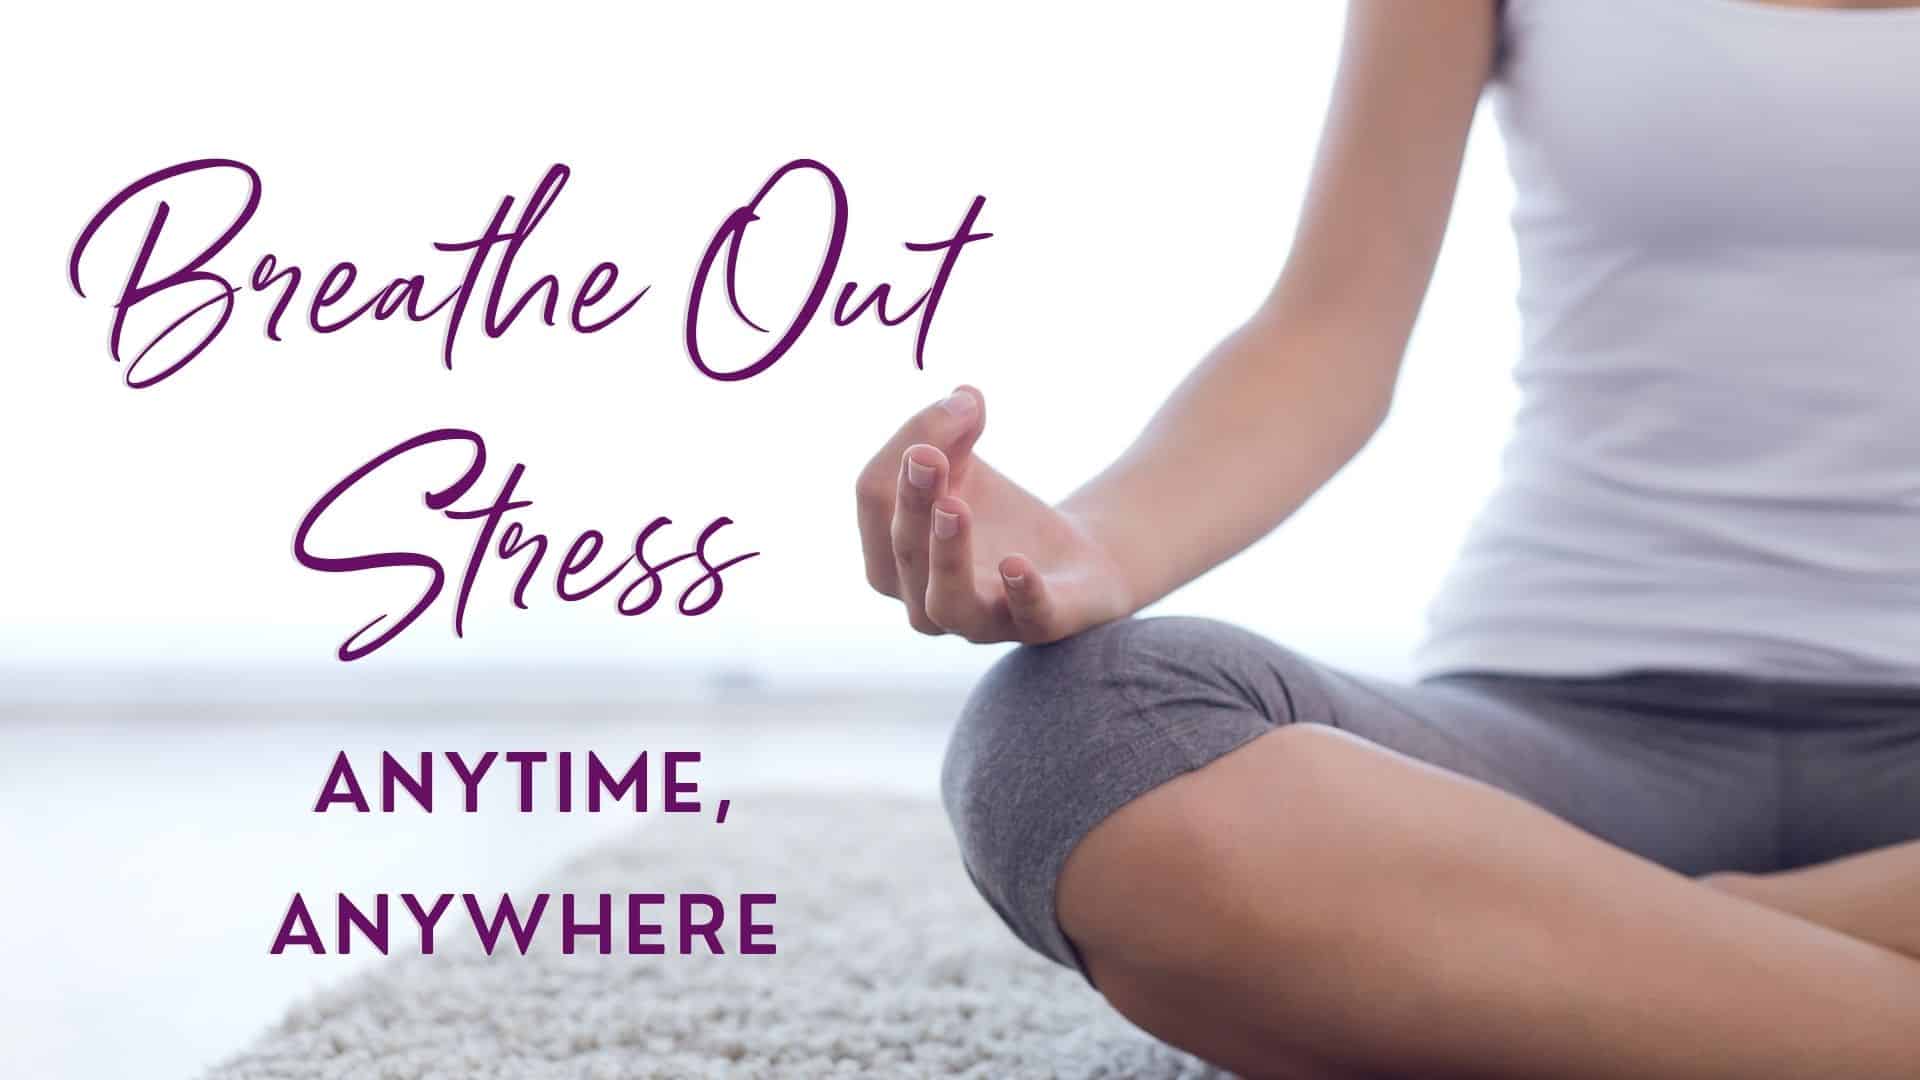 Breathe Out Stress Anytime, Anywhere